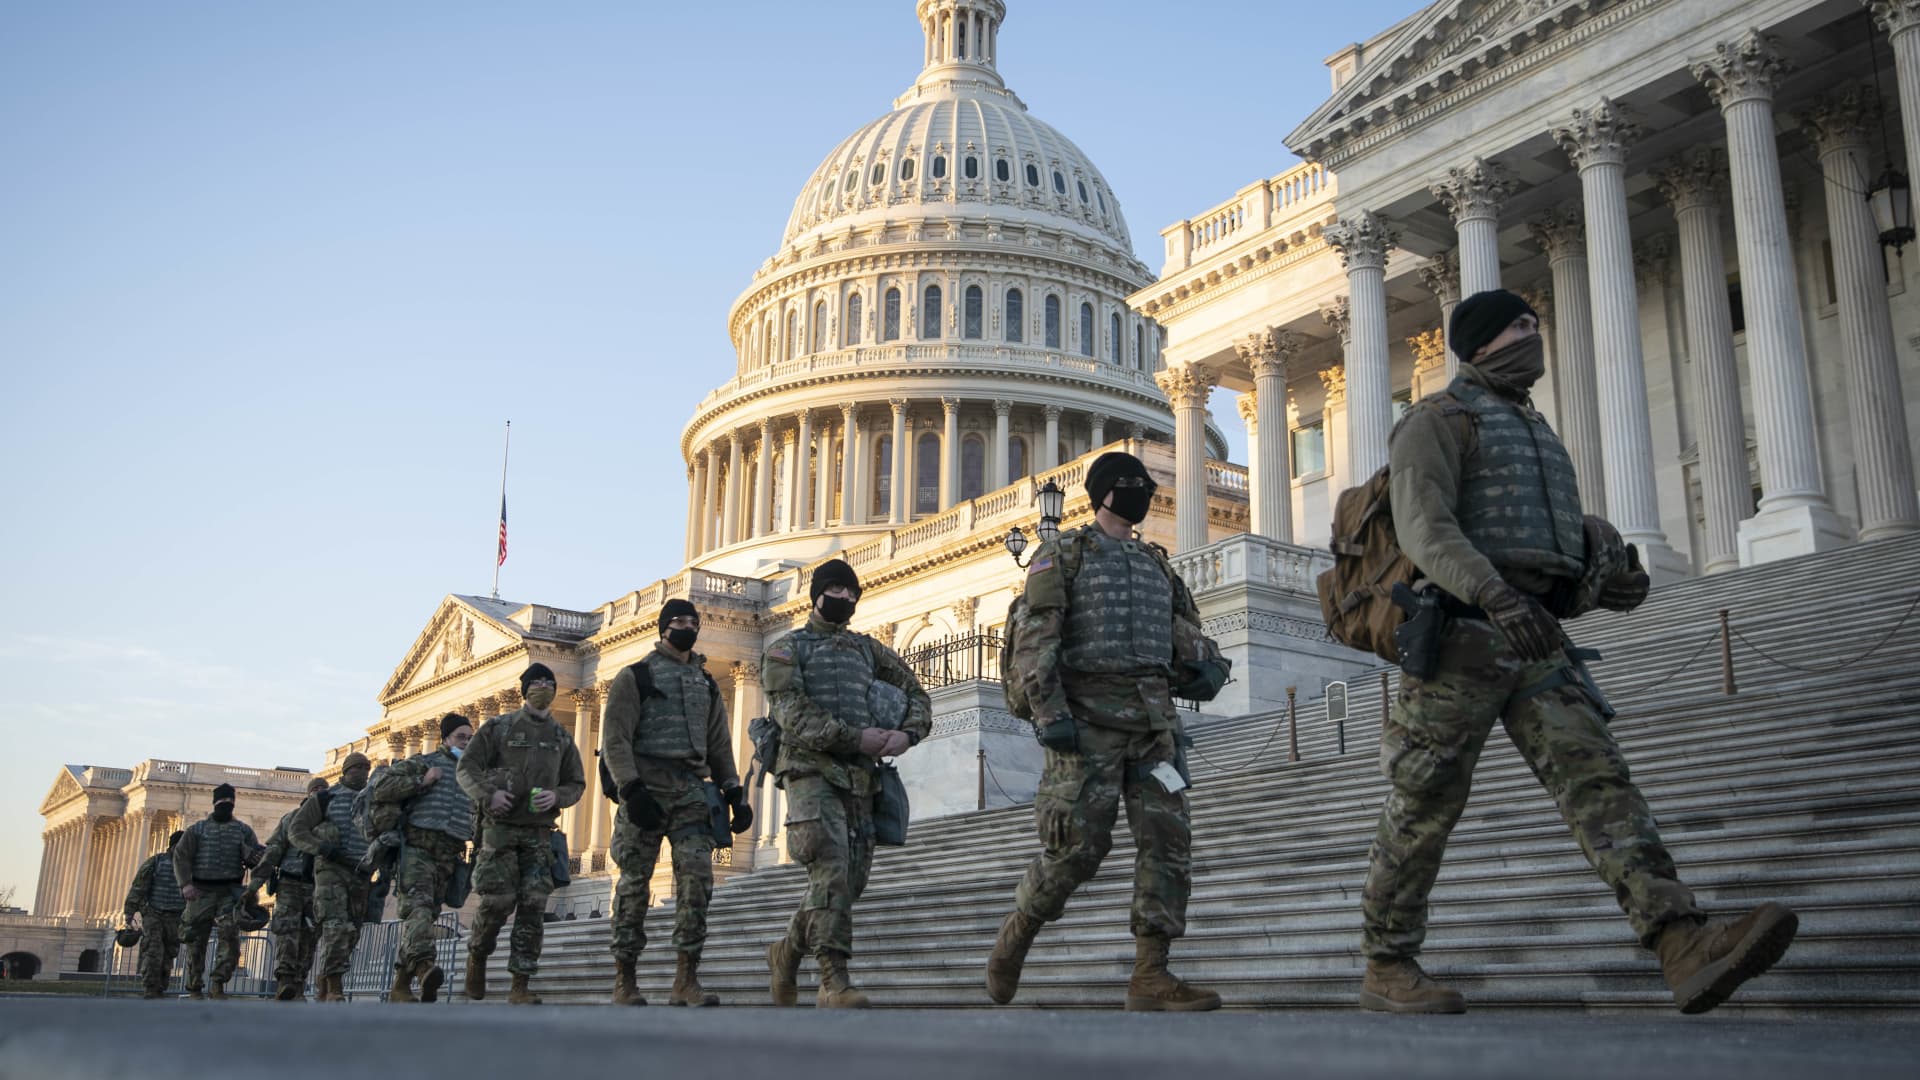 Members of the National Guard walk outside of the U.S. Capitol building in Washington, D.C., U.S., on Wednesday, Jan. 13, 2021.